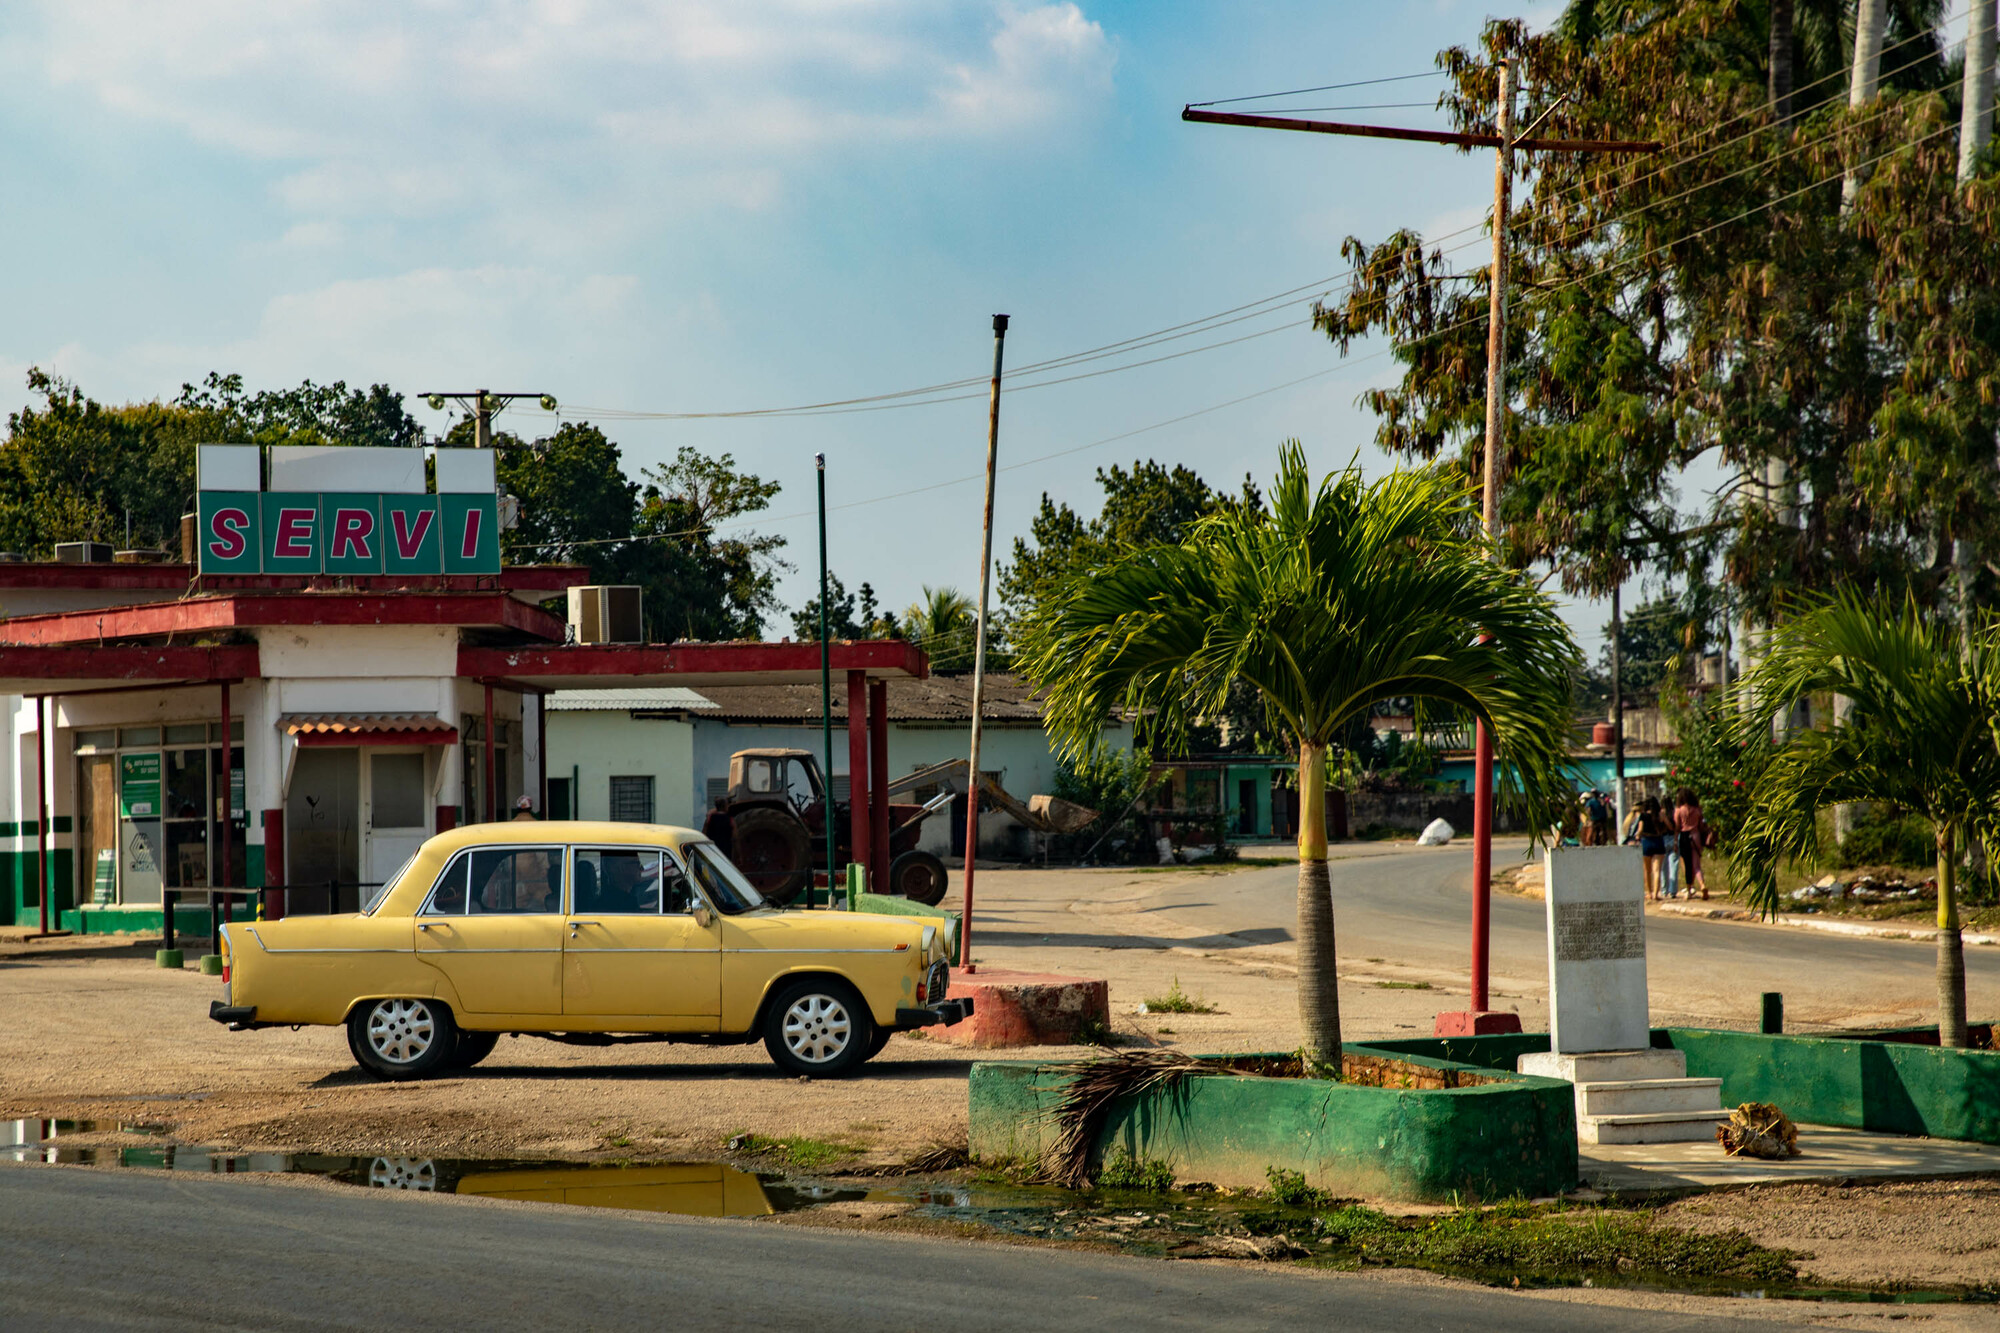 An old yellow car is parked outside of a dated gas station.